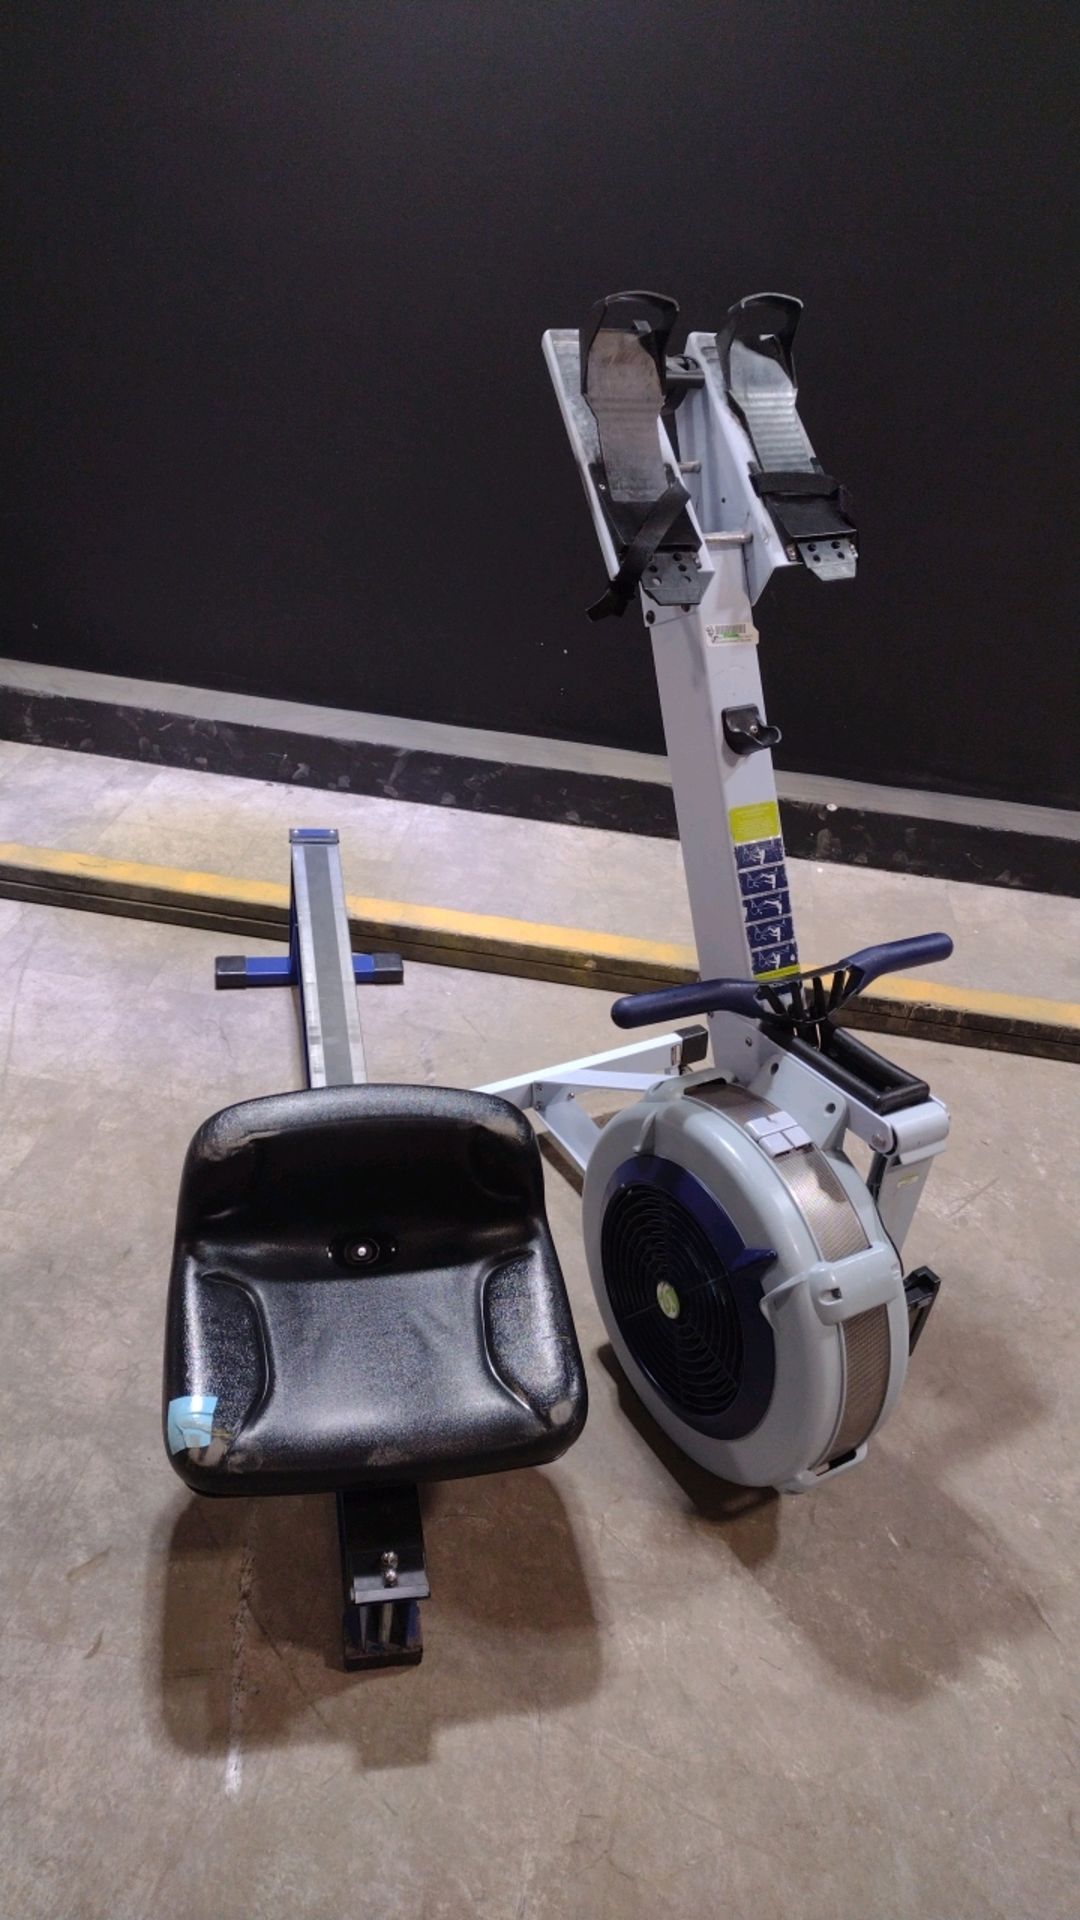 CONCEPT II INDOOR ROWER (LOCATED AT 2440 GREENLEAF AVE, ELK GROVE VILLAGE, IL 60007)